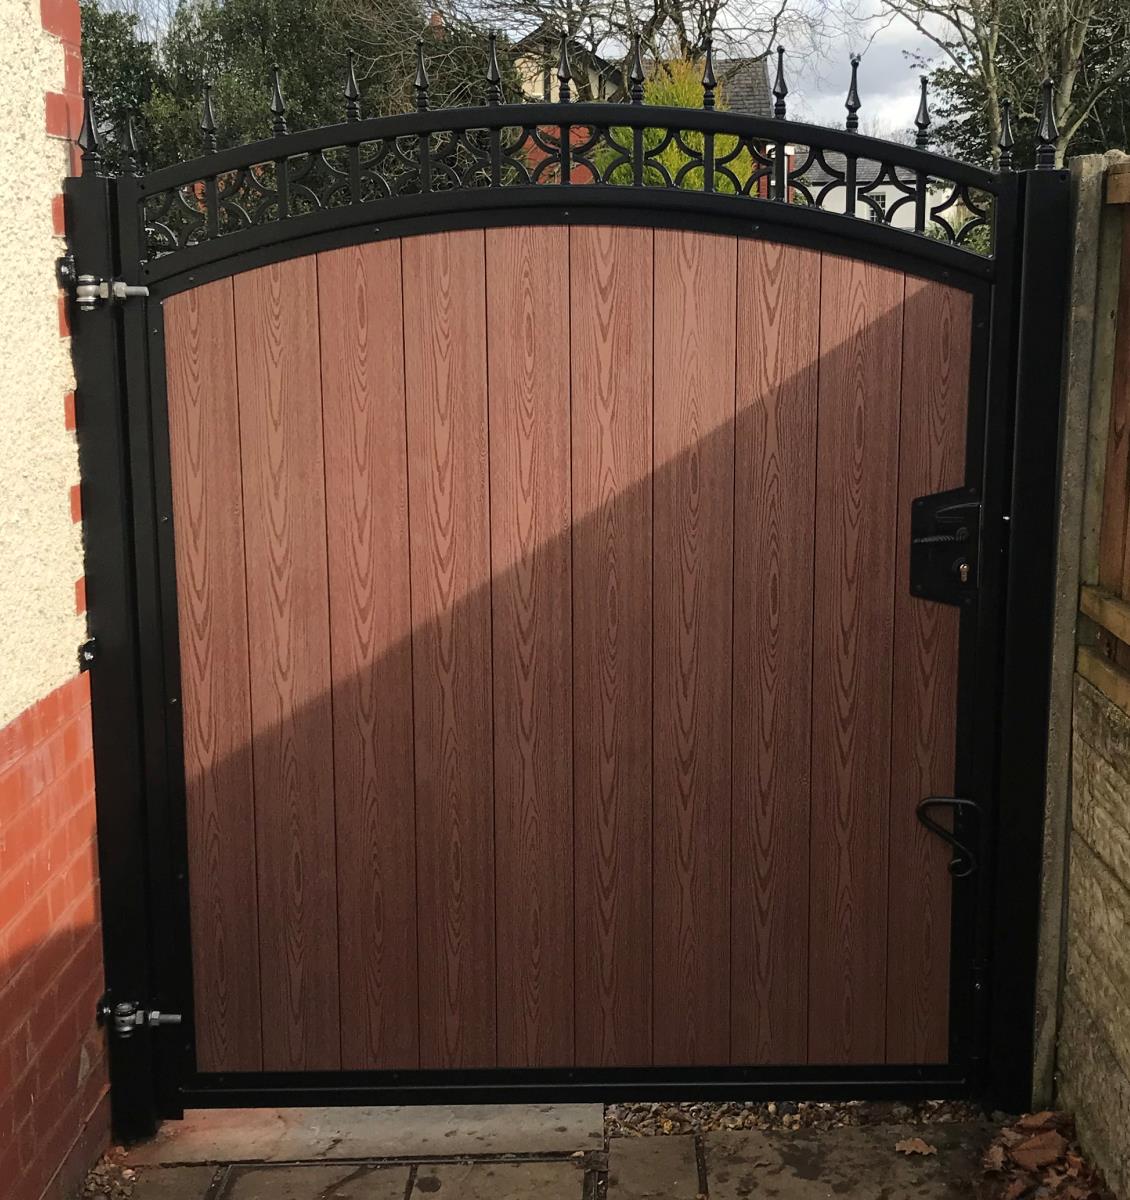 Ornate steel framed timber effect composite gate installation for a property in the Altrincham area.